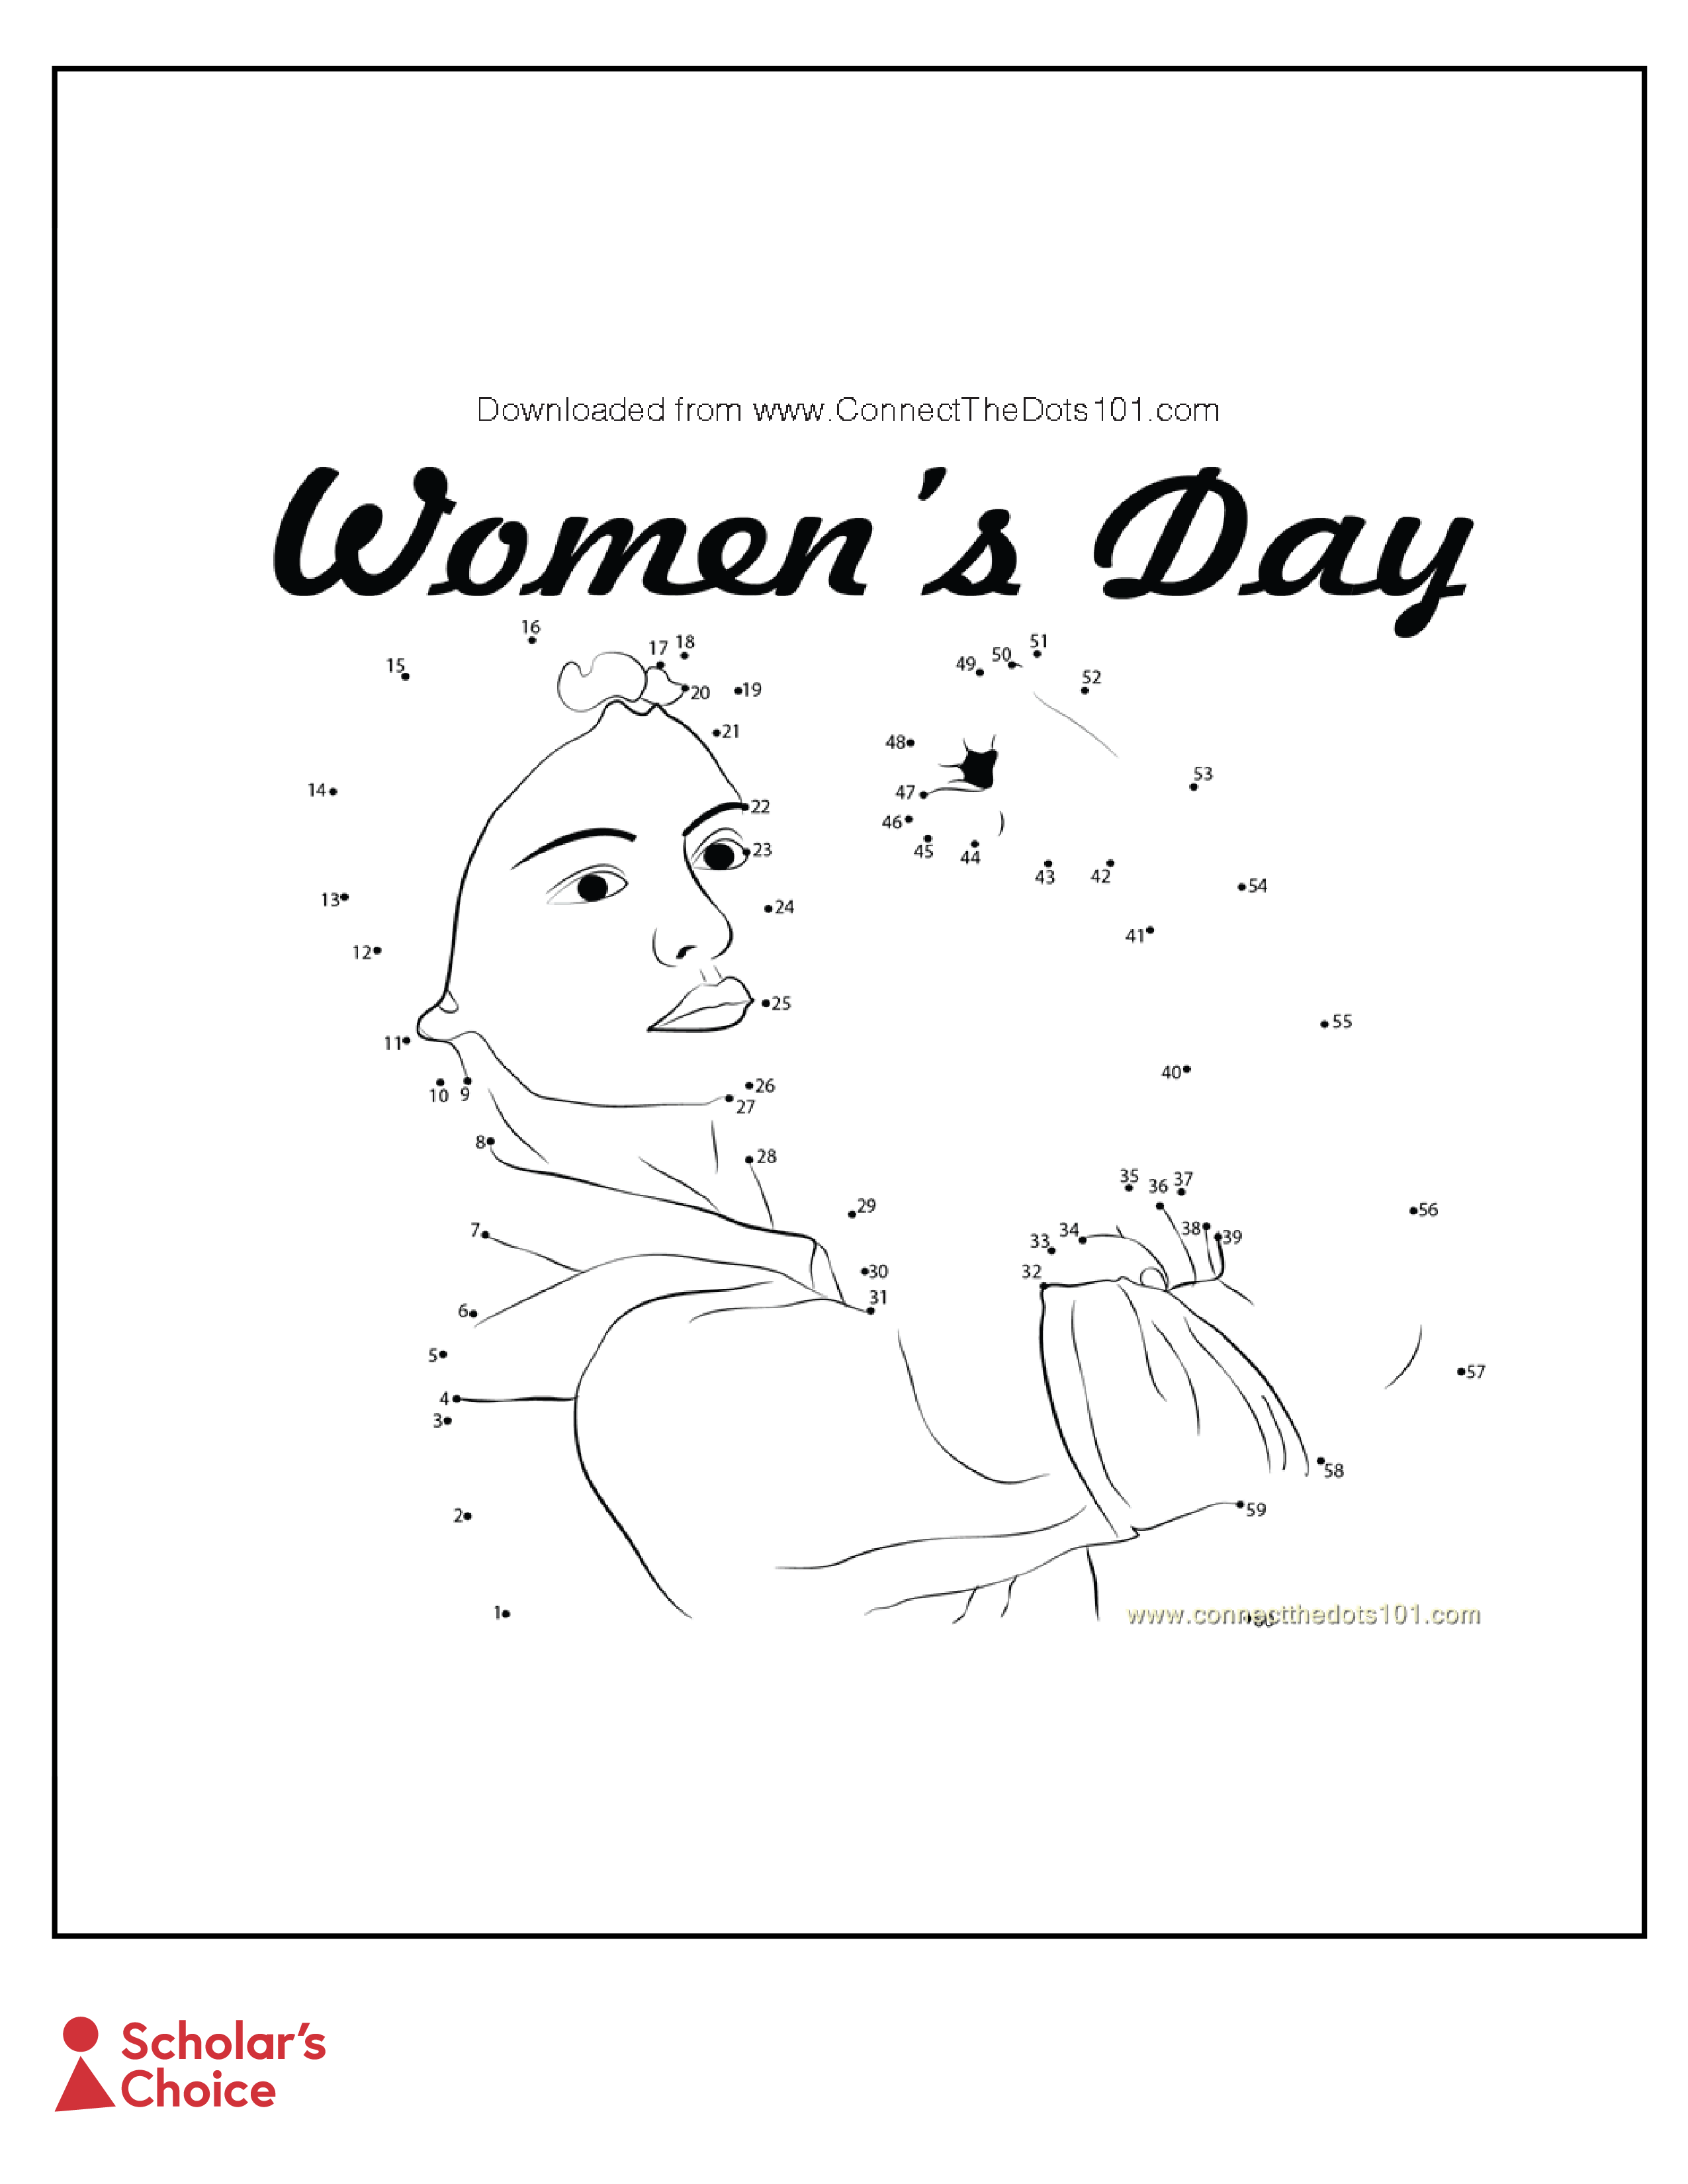 womens-day-connect-dots-14